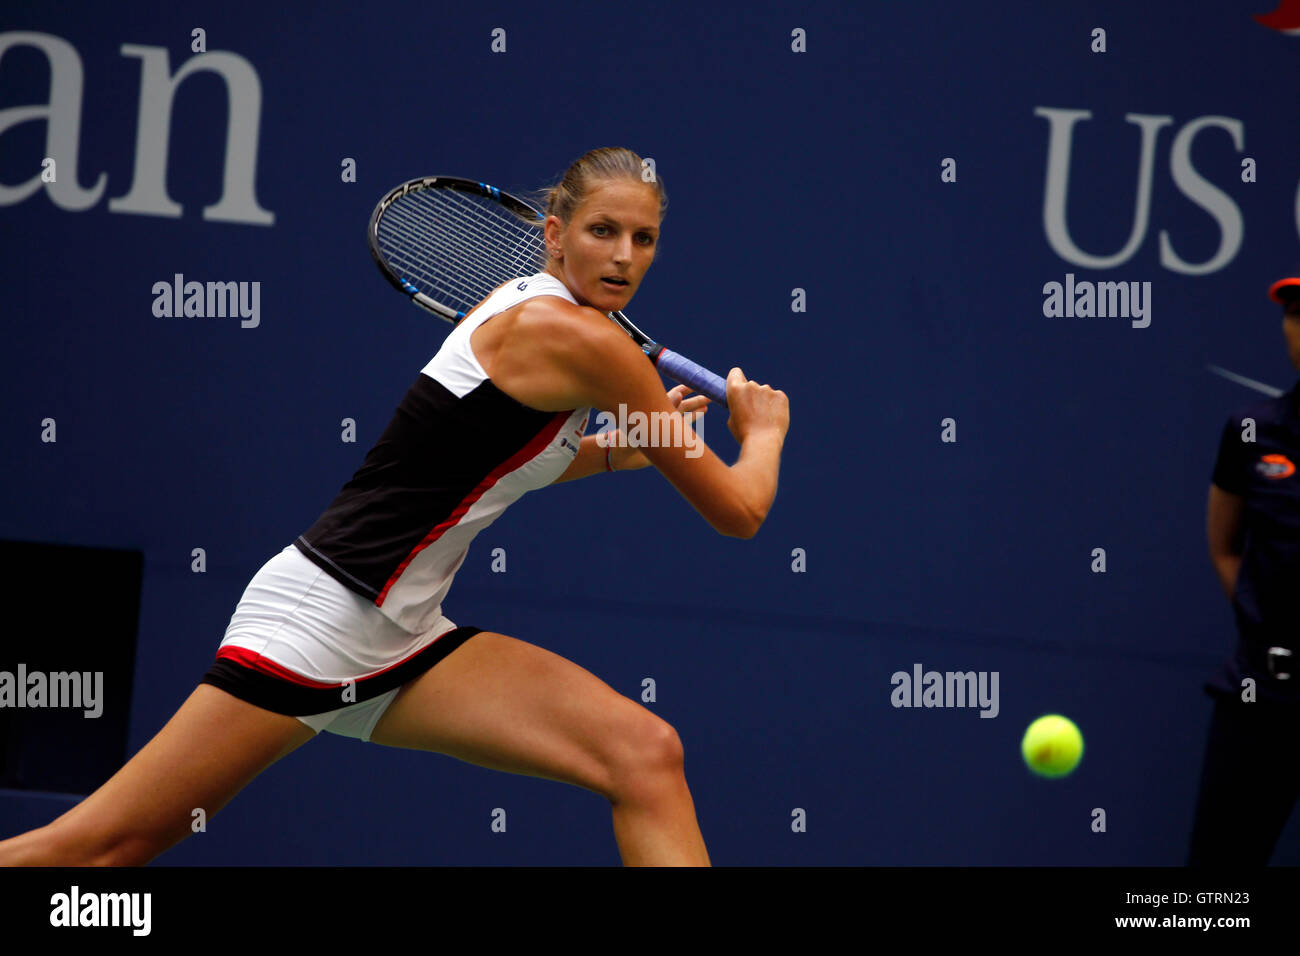 New York, USA. 10th September, 2016. Karolina Pliskova of the Czech Republic in action against Angelique Kerber of Germany during the finals of the United States Open Tennis Championships at Flushing Meadows, New York on Saturday, September 10th.  Kerber won the match and her first U.S. Open title in three sets Credit:  Adam Stoltman/Alamy Live News Stock Photo